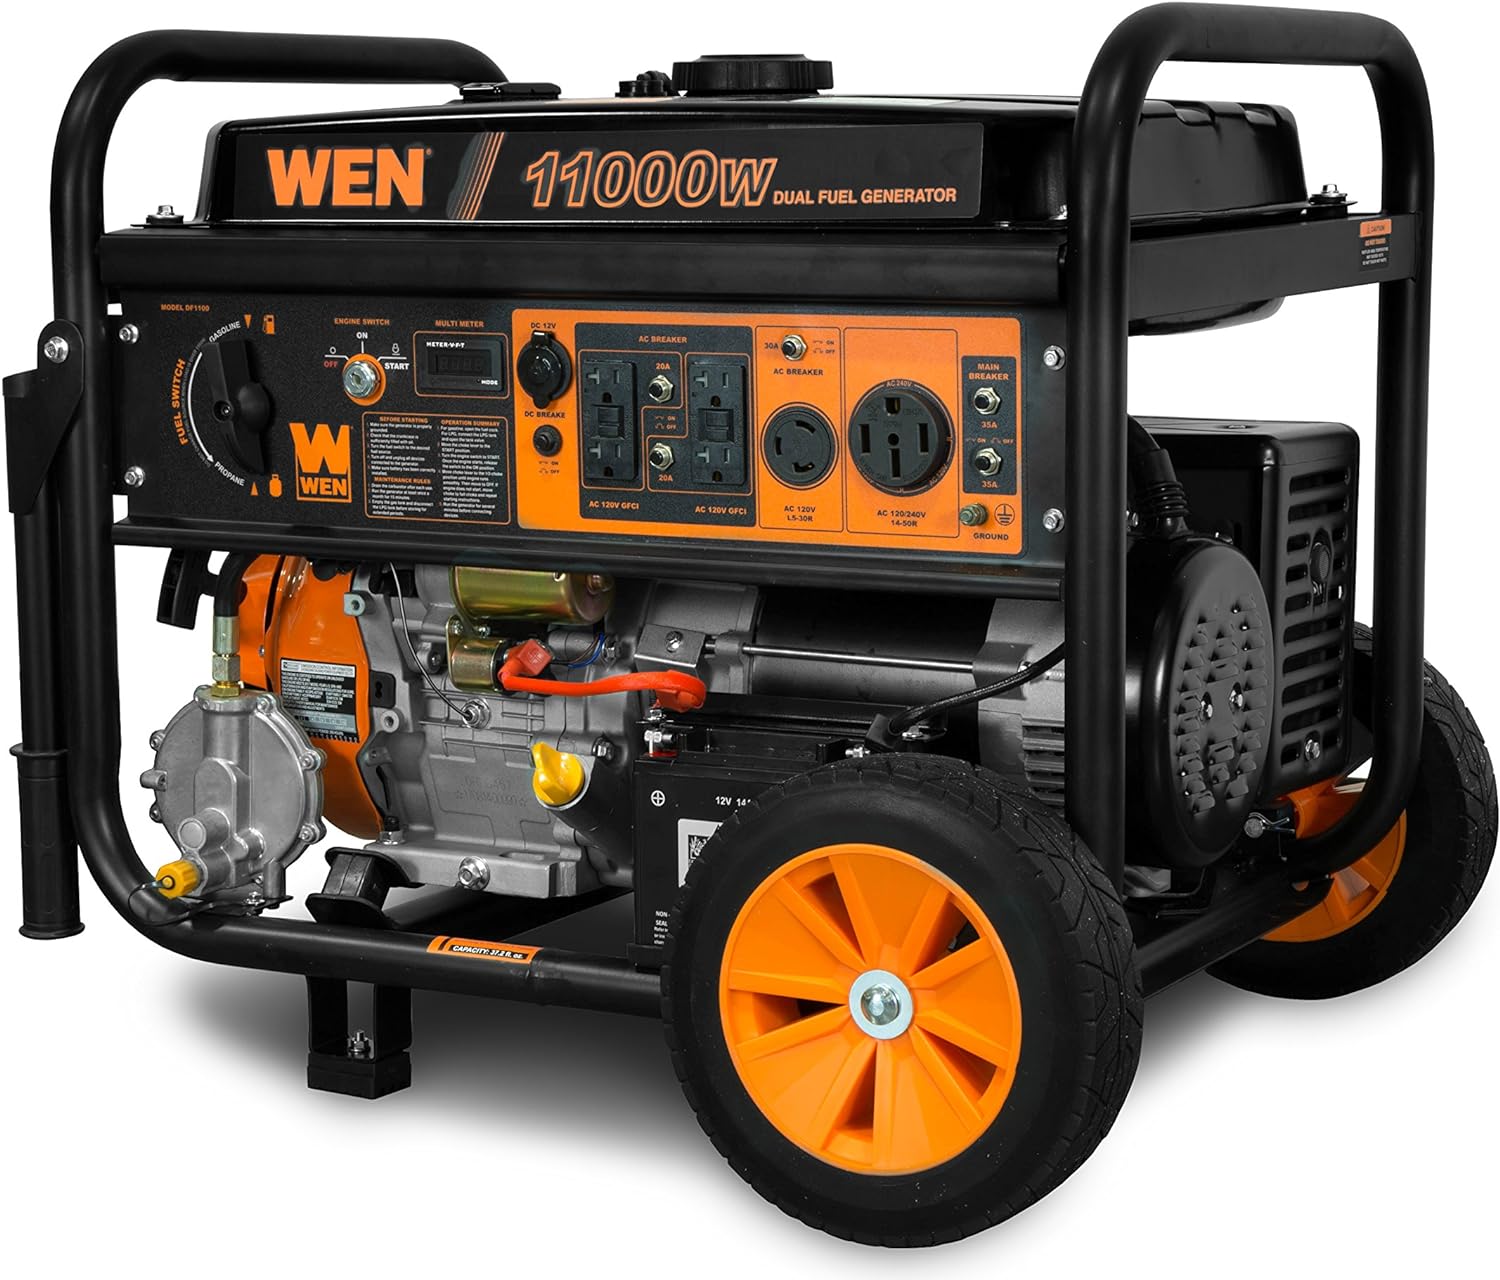 WEN DF1100T 11,000-Watt 120V/240V Dual Fuel Portable Generator with Wheel Kit and Electric Start